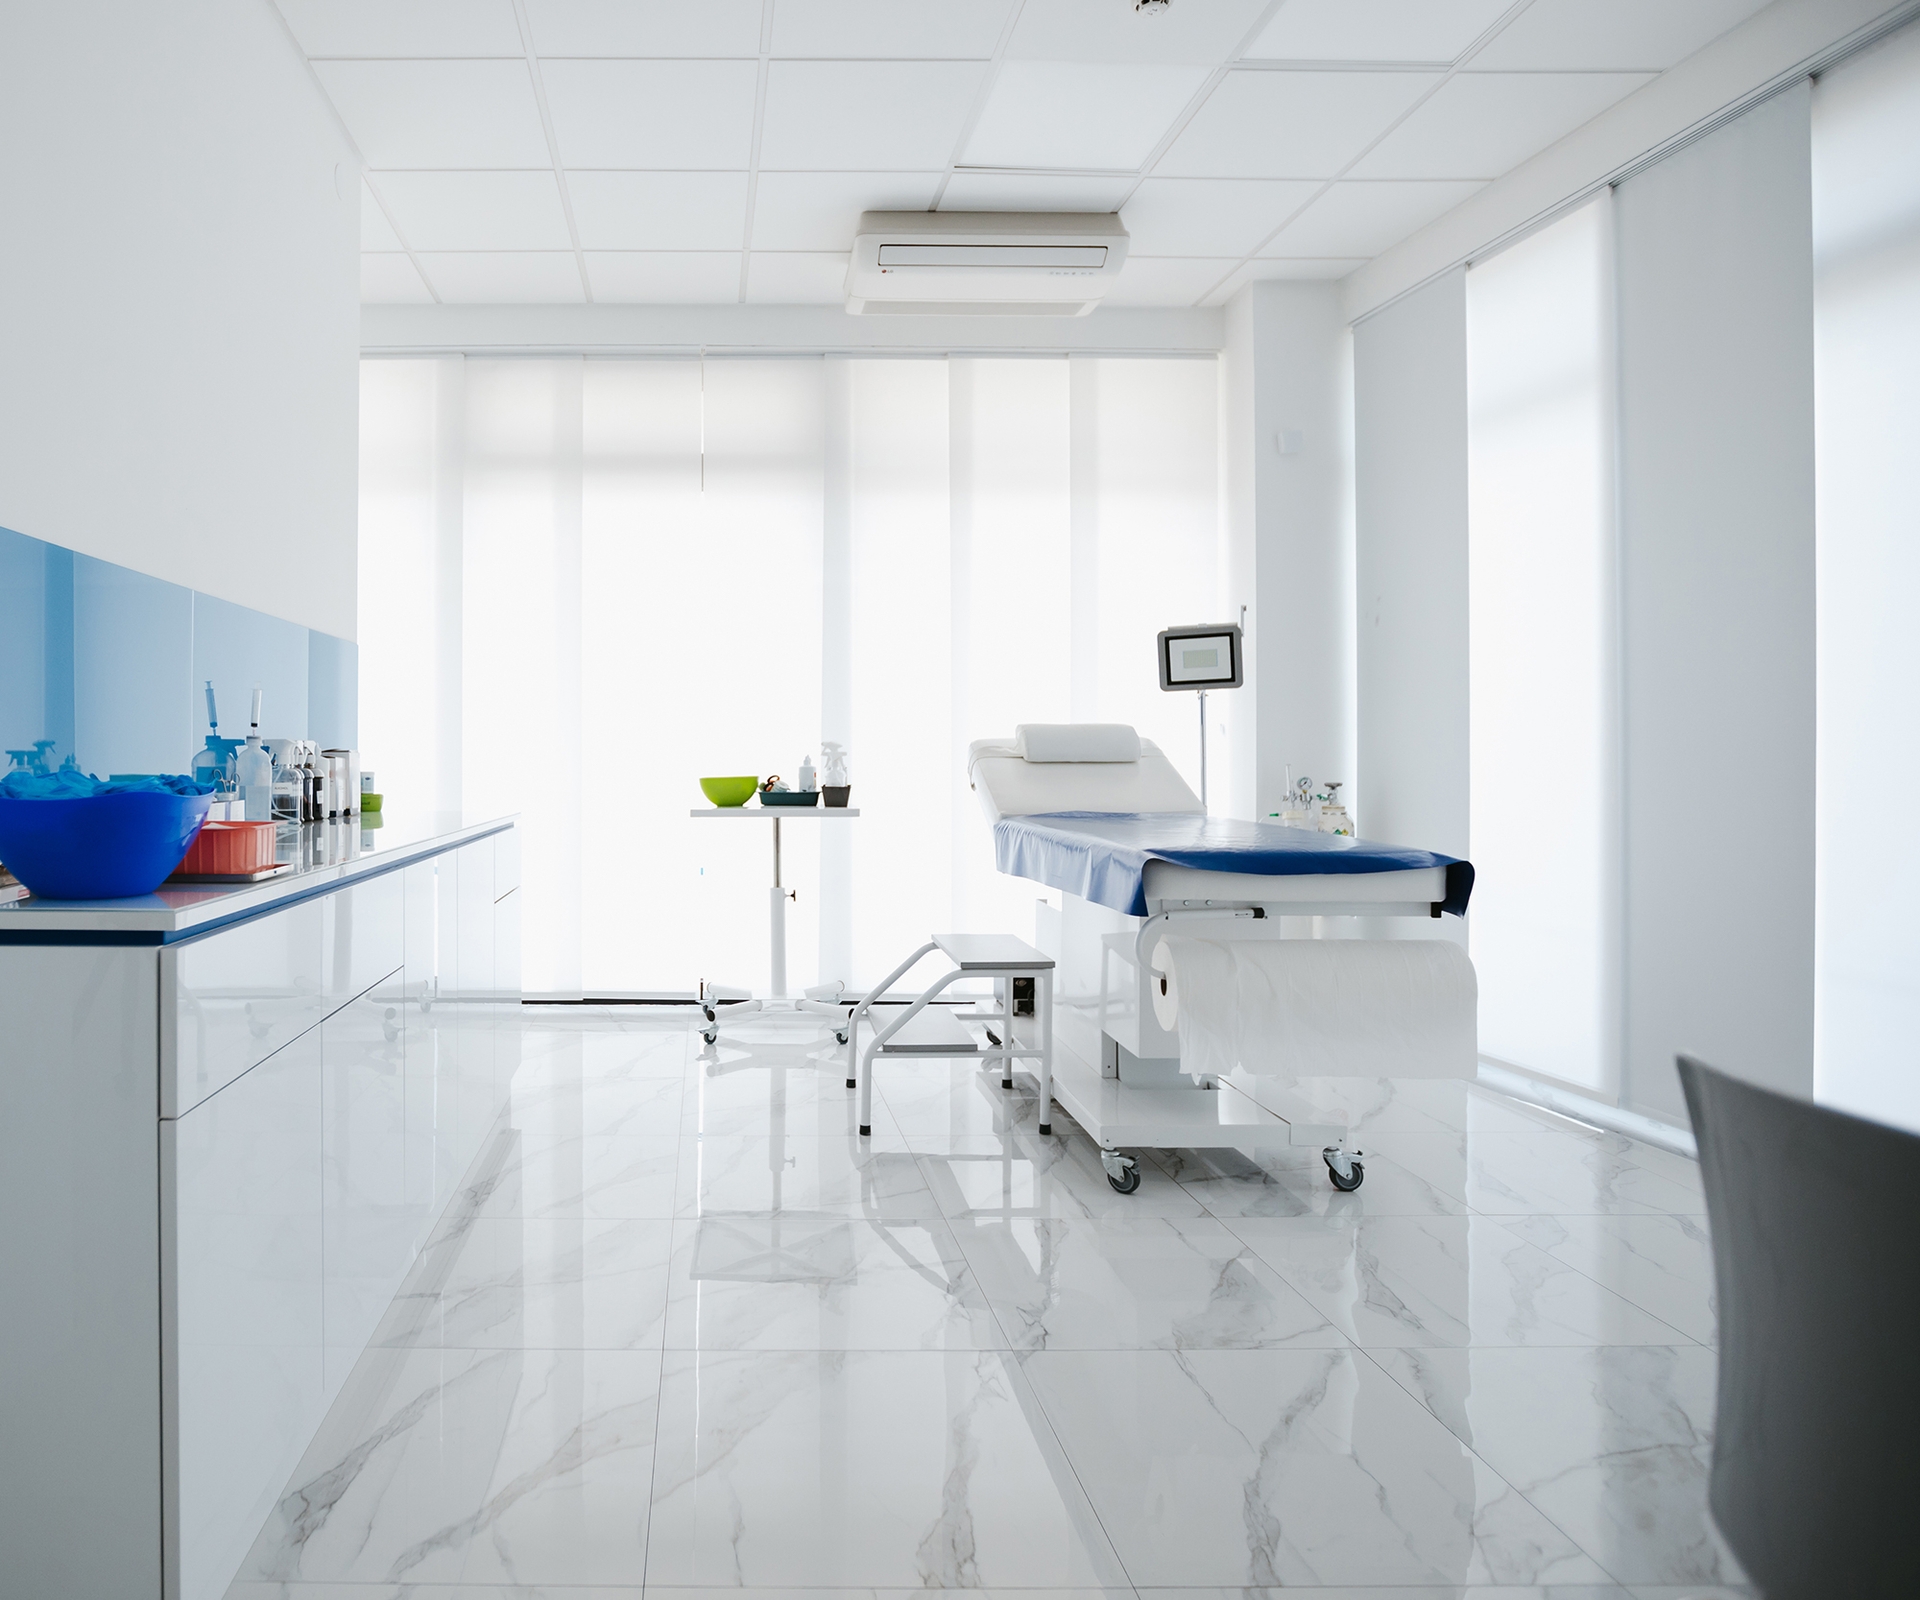 Depend on SERVPRO for healthcare cleaning services